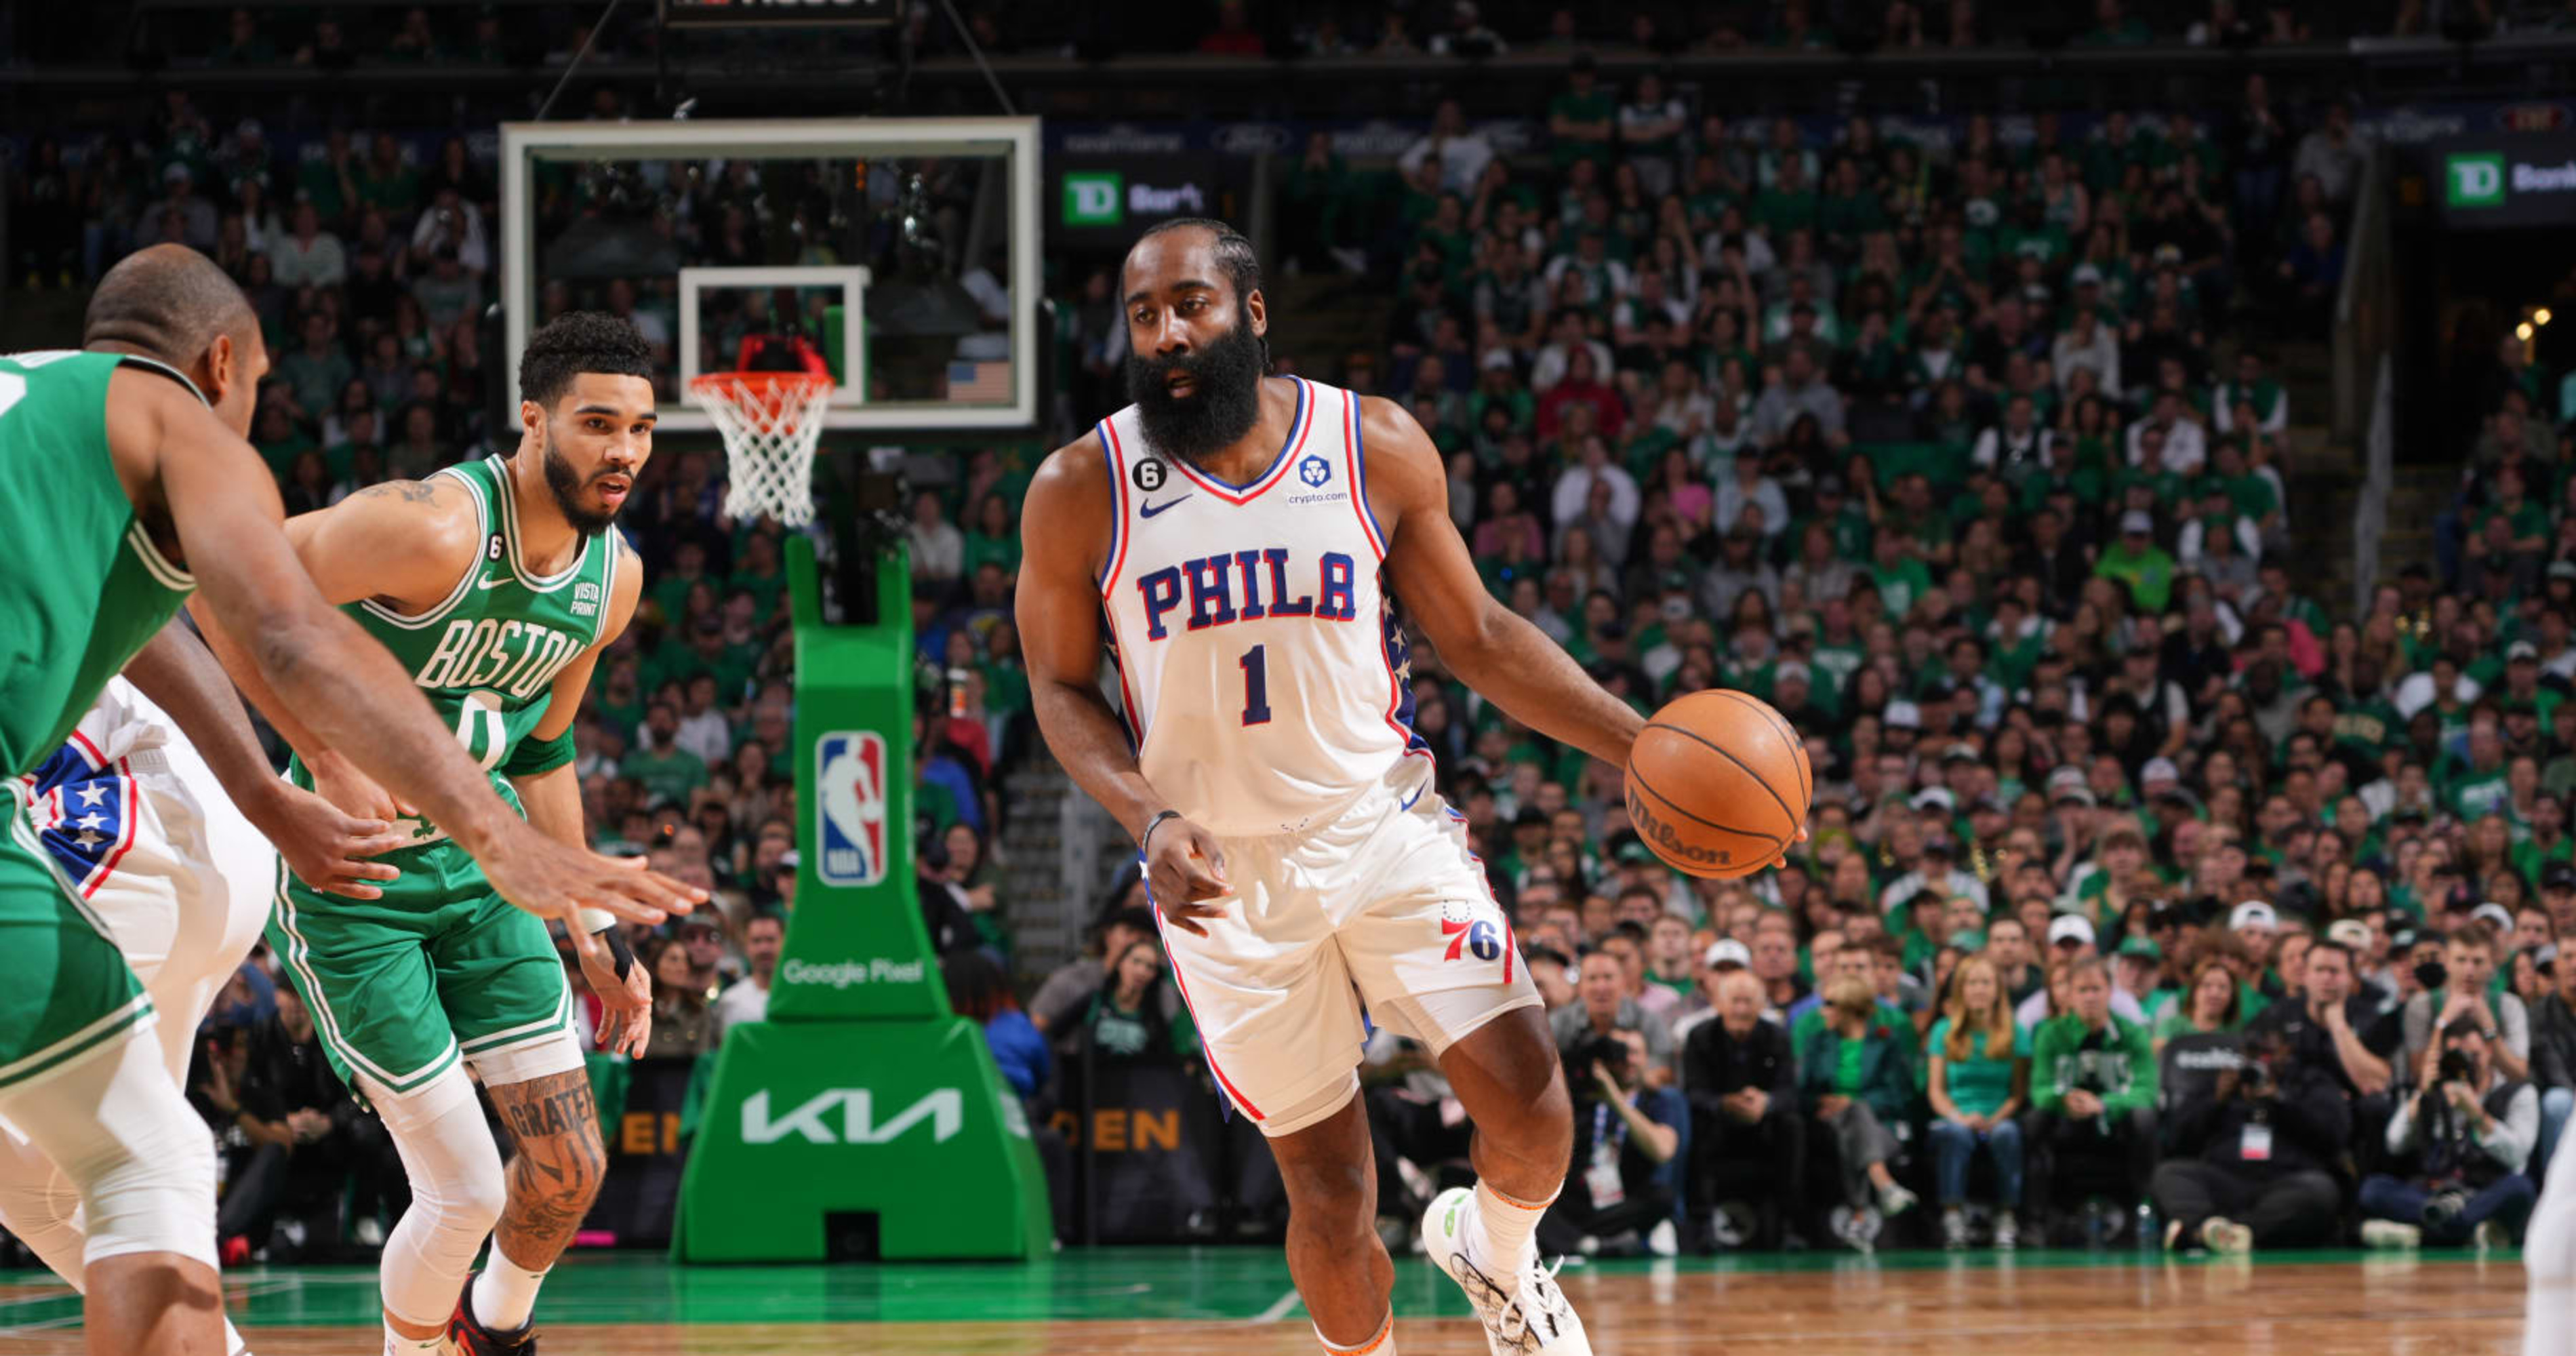 Nba Exec On James Harden 76ers Rumors Will Get Ugly Enough That Pg Gets Himself Out News